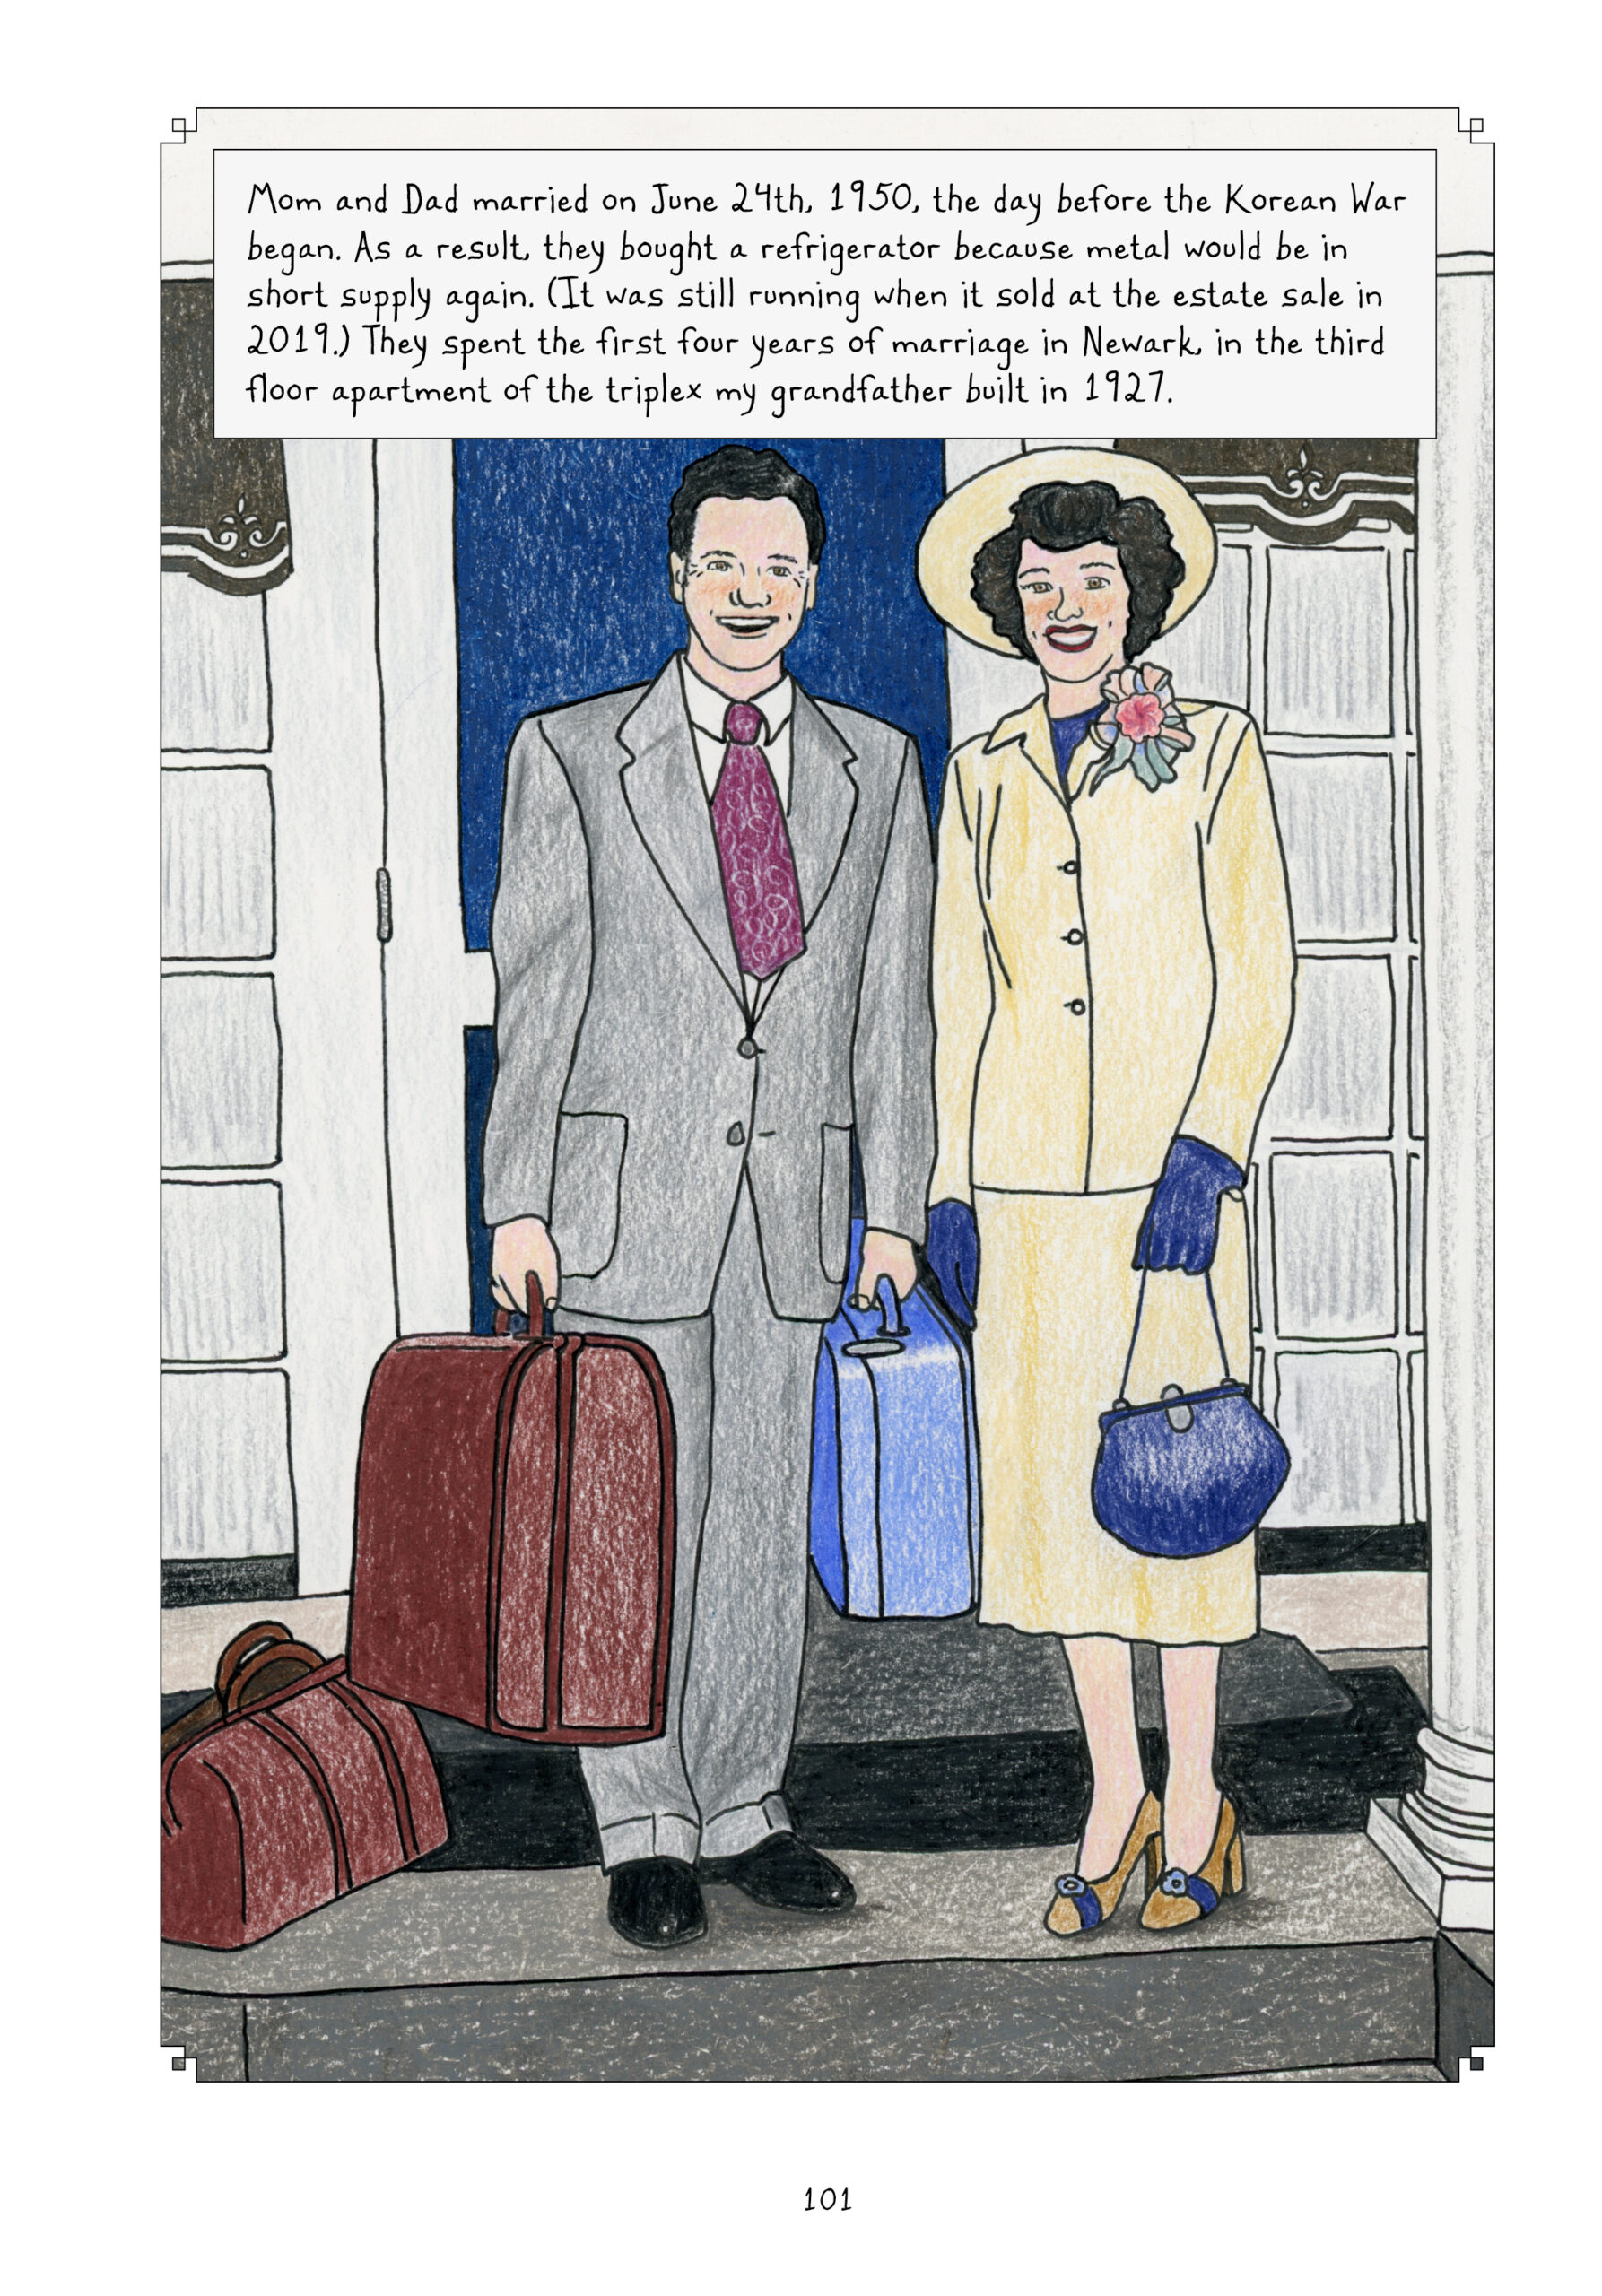 A slightly older Lorraine and Lynnâ€™s dad stand side by side, smiling widely for the camera in front of white and blue ornate doors. Lynnâ€™s dad wears a gray suit with a burgundy tie; Lorraine wears a matching yellow blazer, skirt, and hat, with a large floral brooch on her blazer collar. She also wears blue gloves that match her blue purse and blue shirt, and beige and blue pumps. Her hair is shorter here, just about an inch or two below her ears with bangs. Lynn narrates, â€œMom and Dad married on June 24th, 1950, the day before the Korean War began. As a result, they bought a refrigerator because metal would be in short supply again. (It was still running when it sold at the estate sale in 2019).) They spent the first four years of marriage in Newark, in the third floor apartment of the triplex my grandfather built in 1927.â€